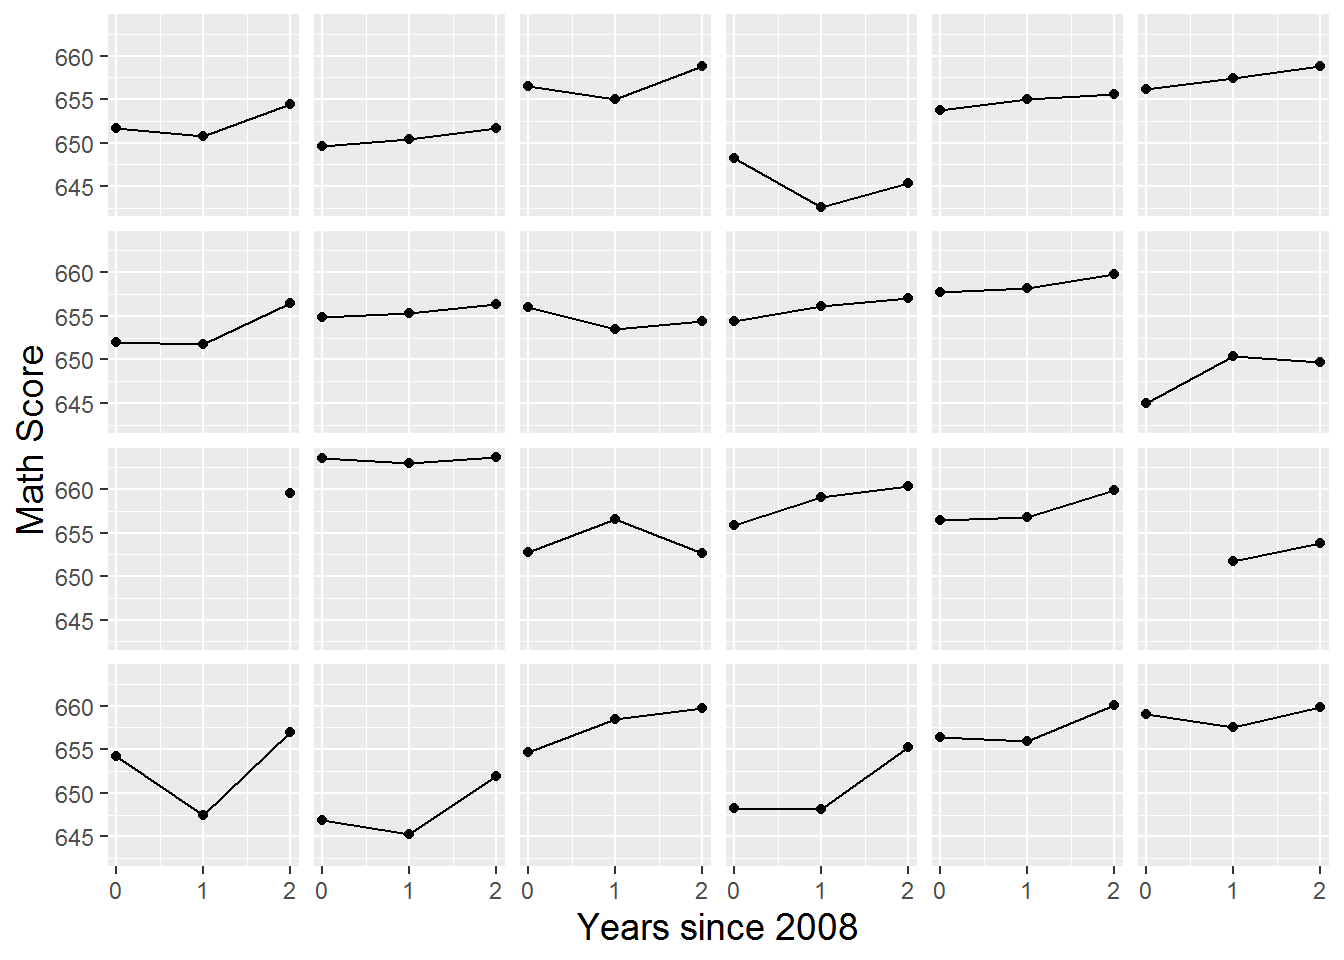 Lattice plot by school of math scores over time for the first 24 schools in the data set.